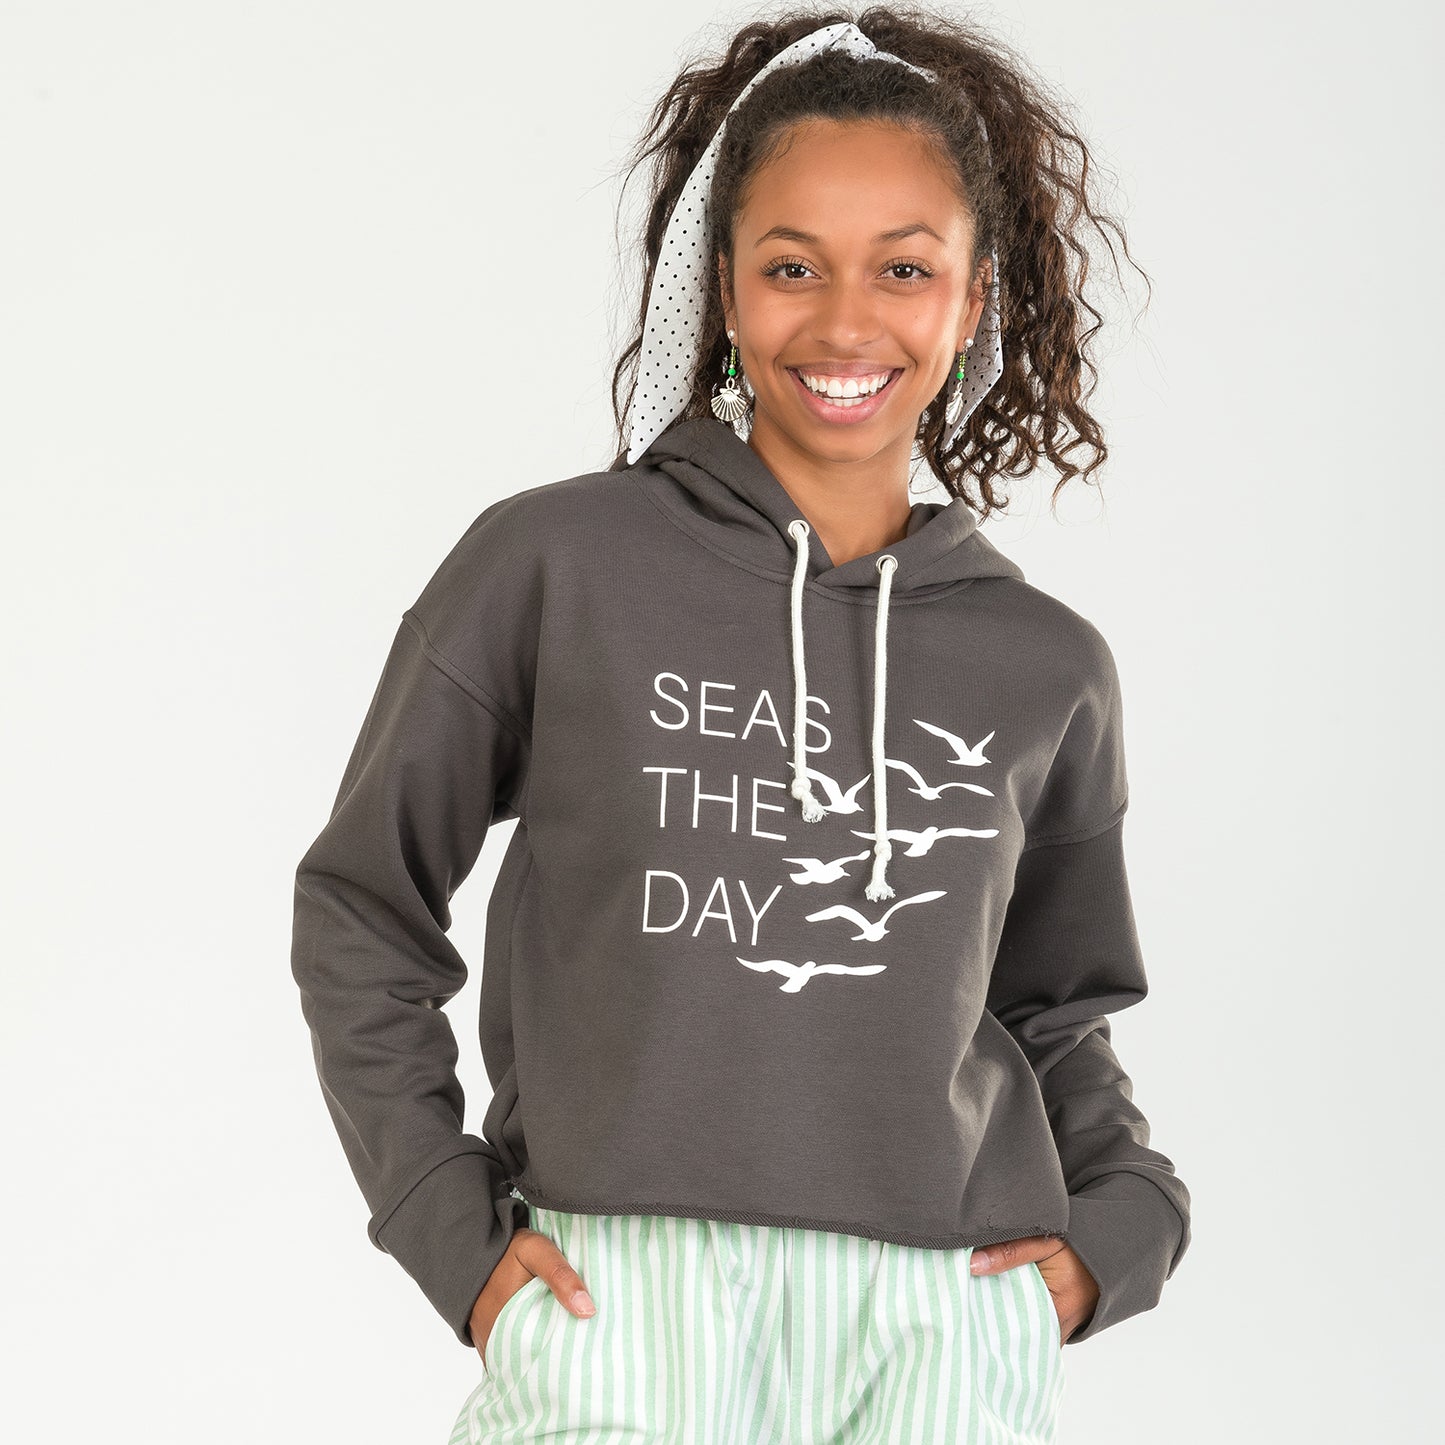 Seas The Day Cropped Hoodie